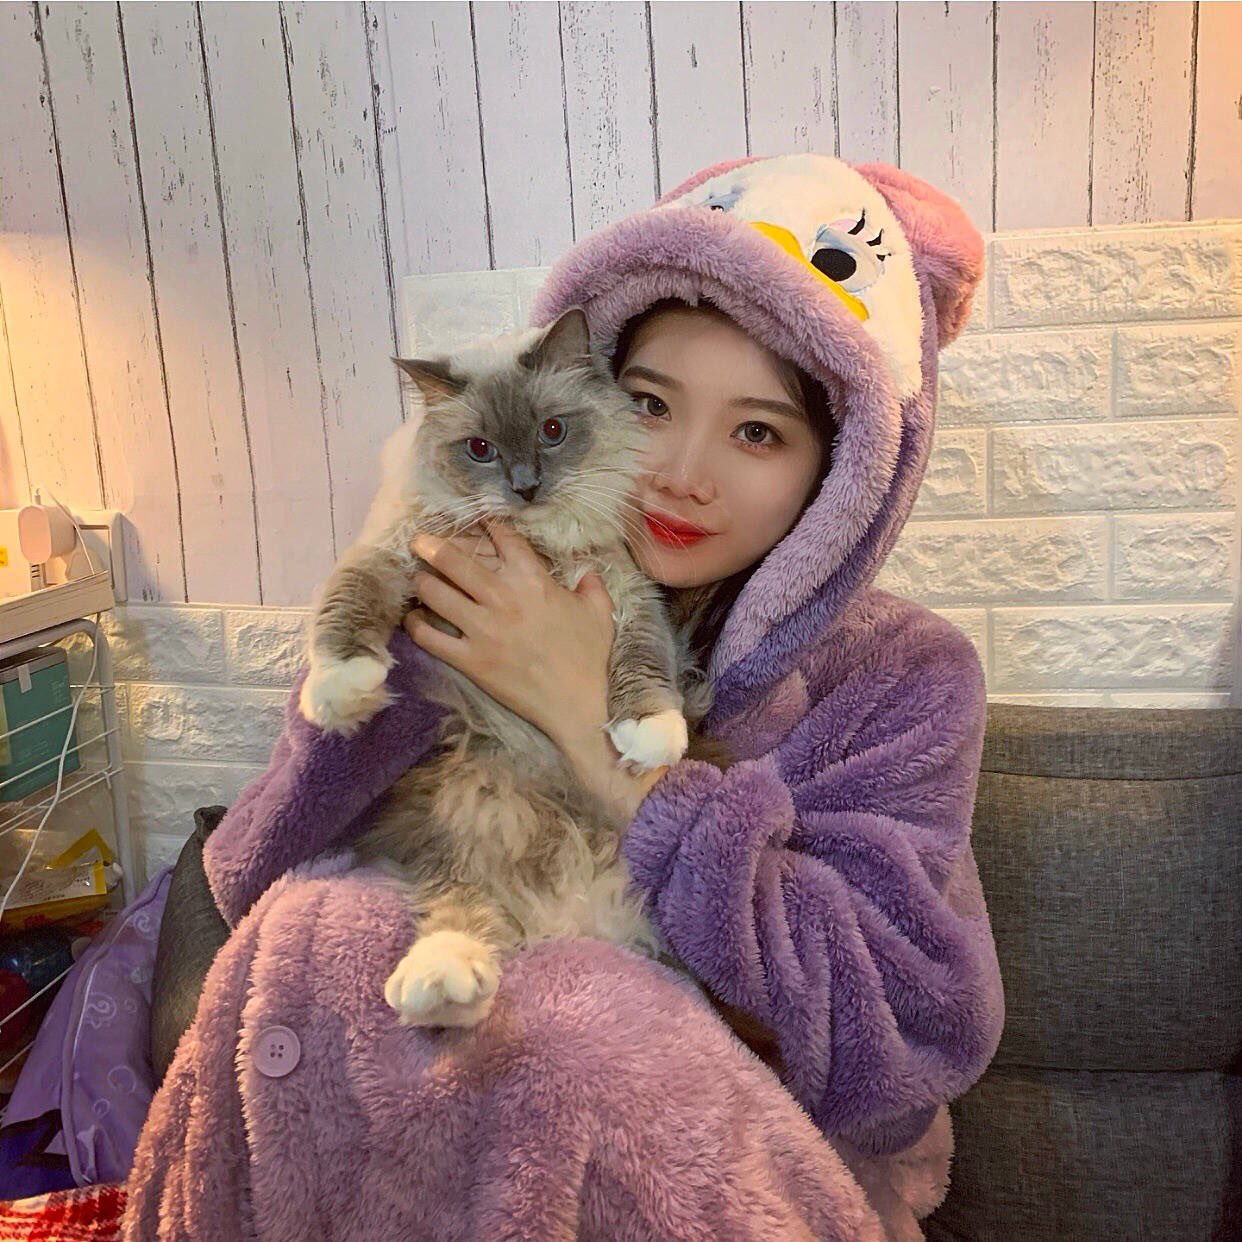 smy wearing a fluffy donald duck onesie and holding her cat